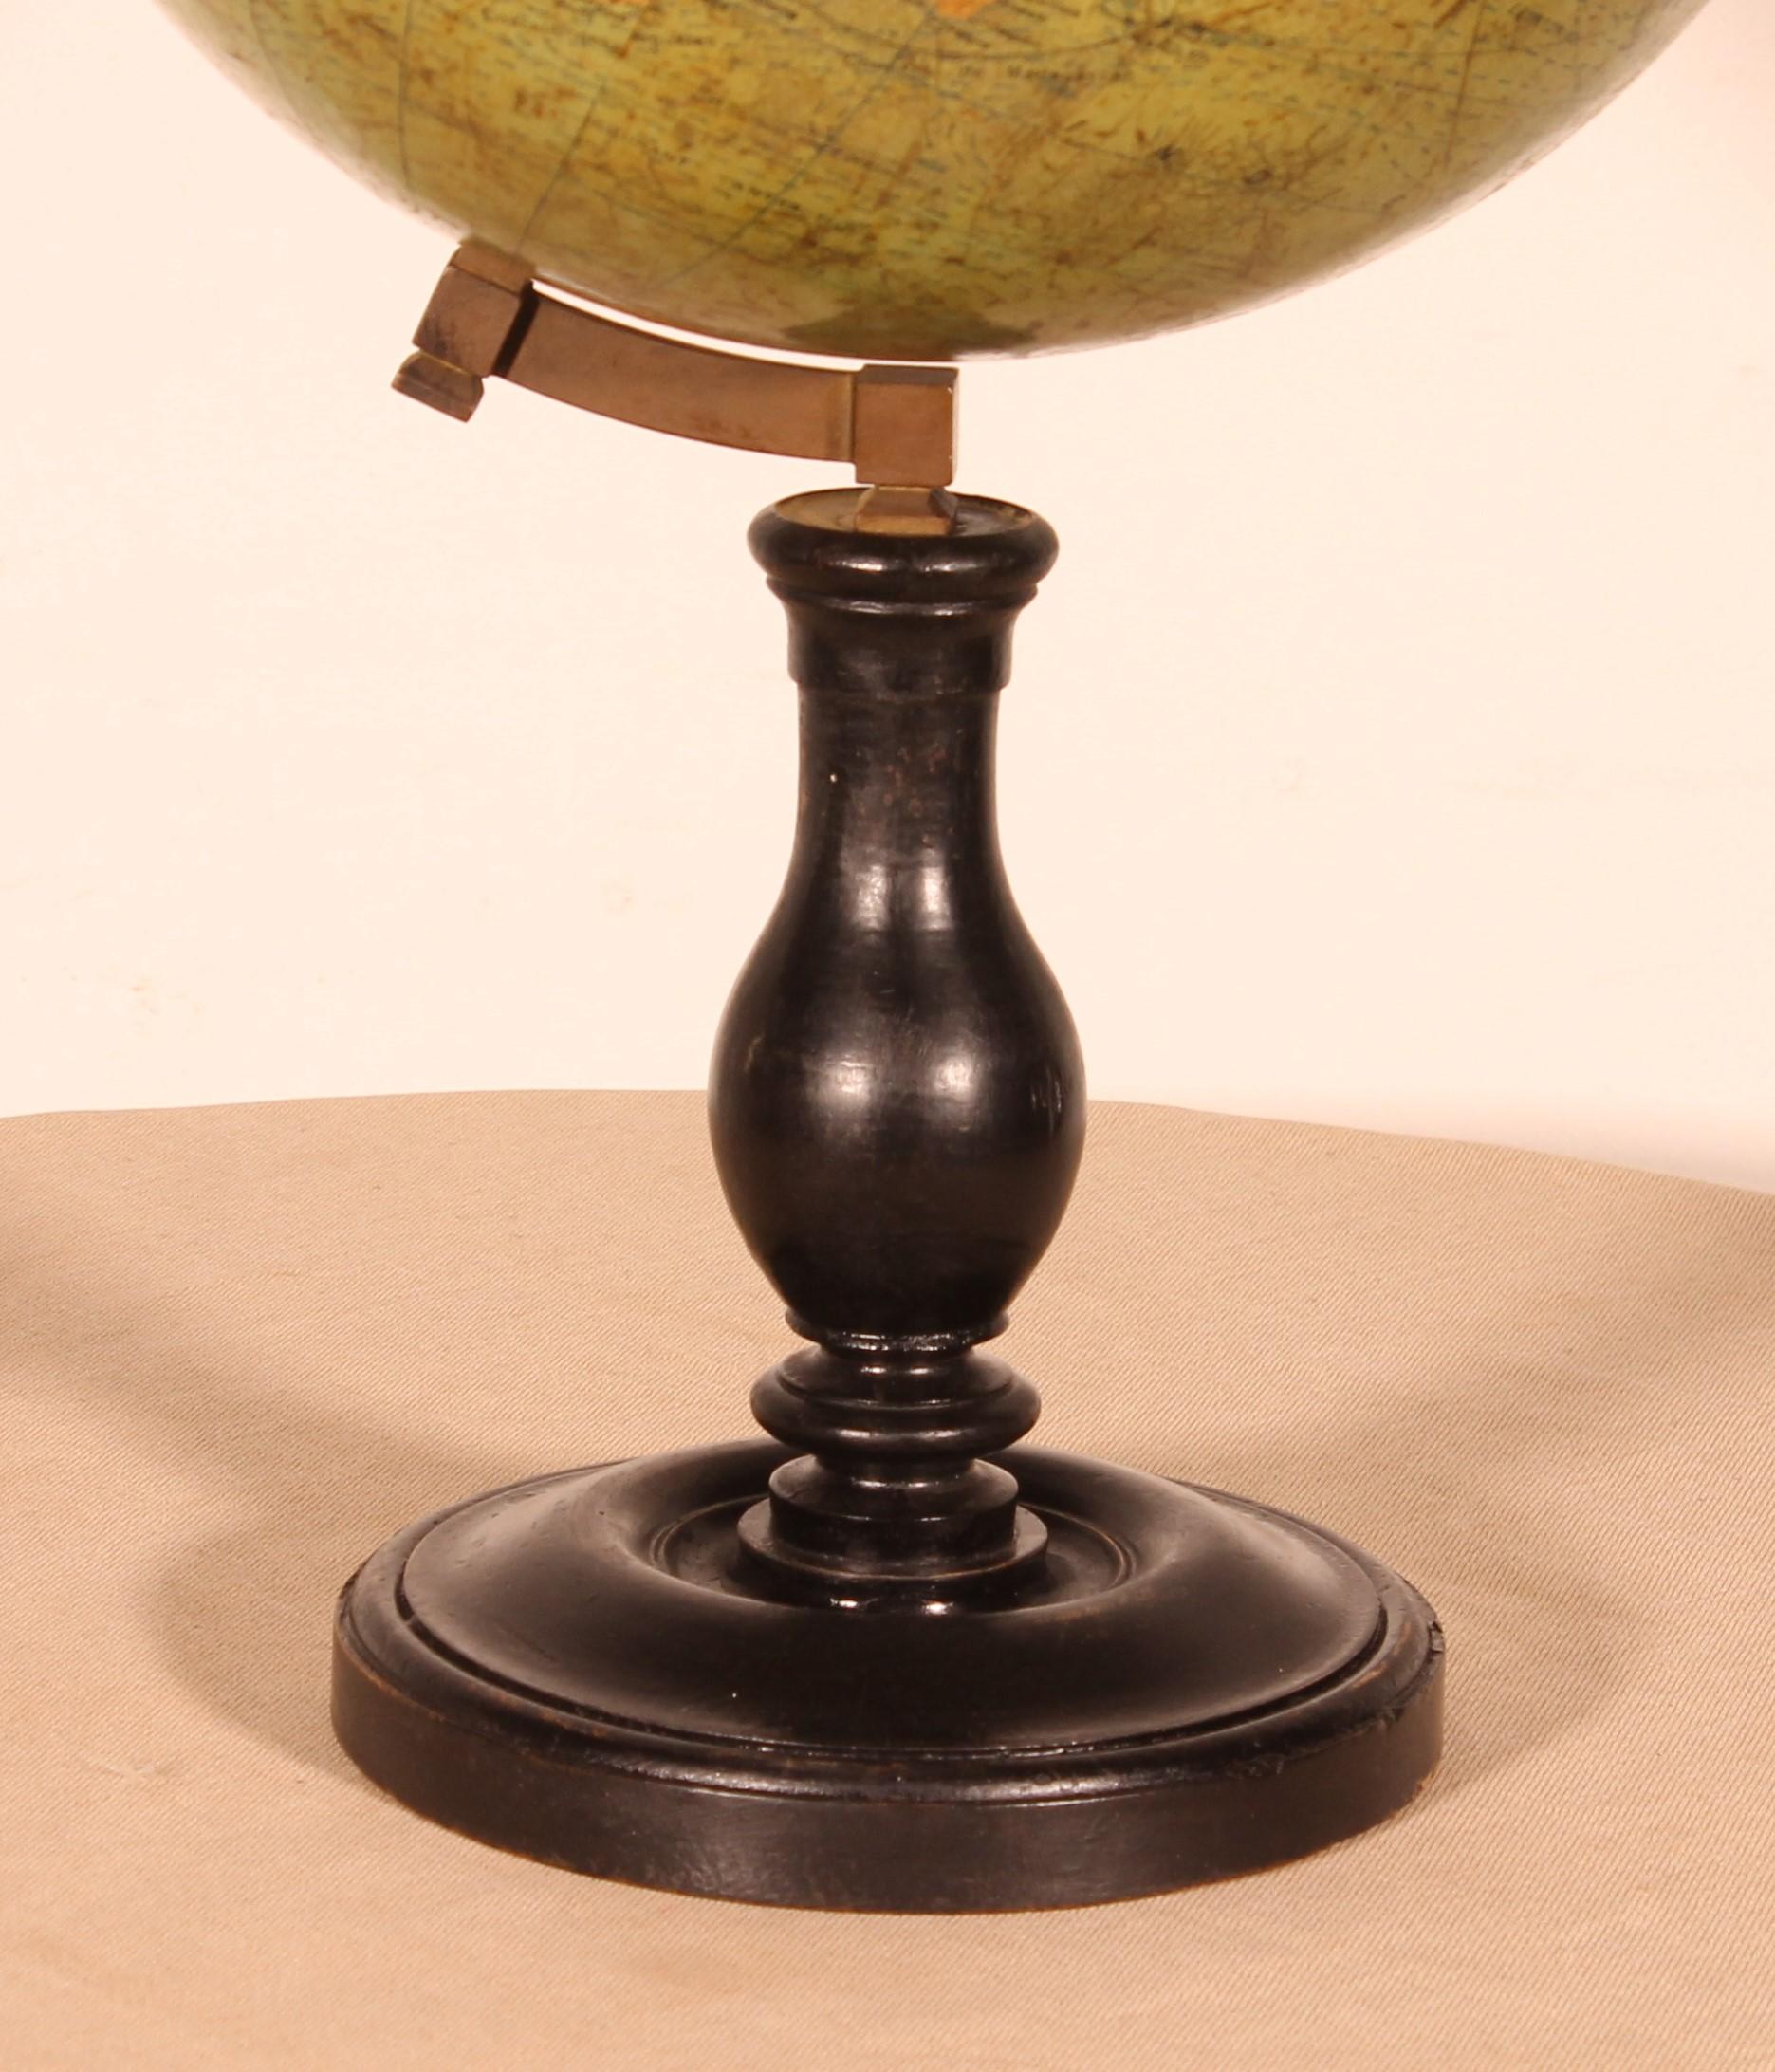 Very beautiful Terrestrial Globe from the beginning of the 20th century circa 1910 by G.Thomas publisher Paris

The Terrestrial Globe has a very beautiful blackened wooden base with beautiful turning

Very beautiful Terrestrial Globe in superb